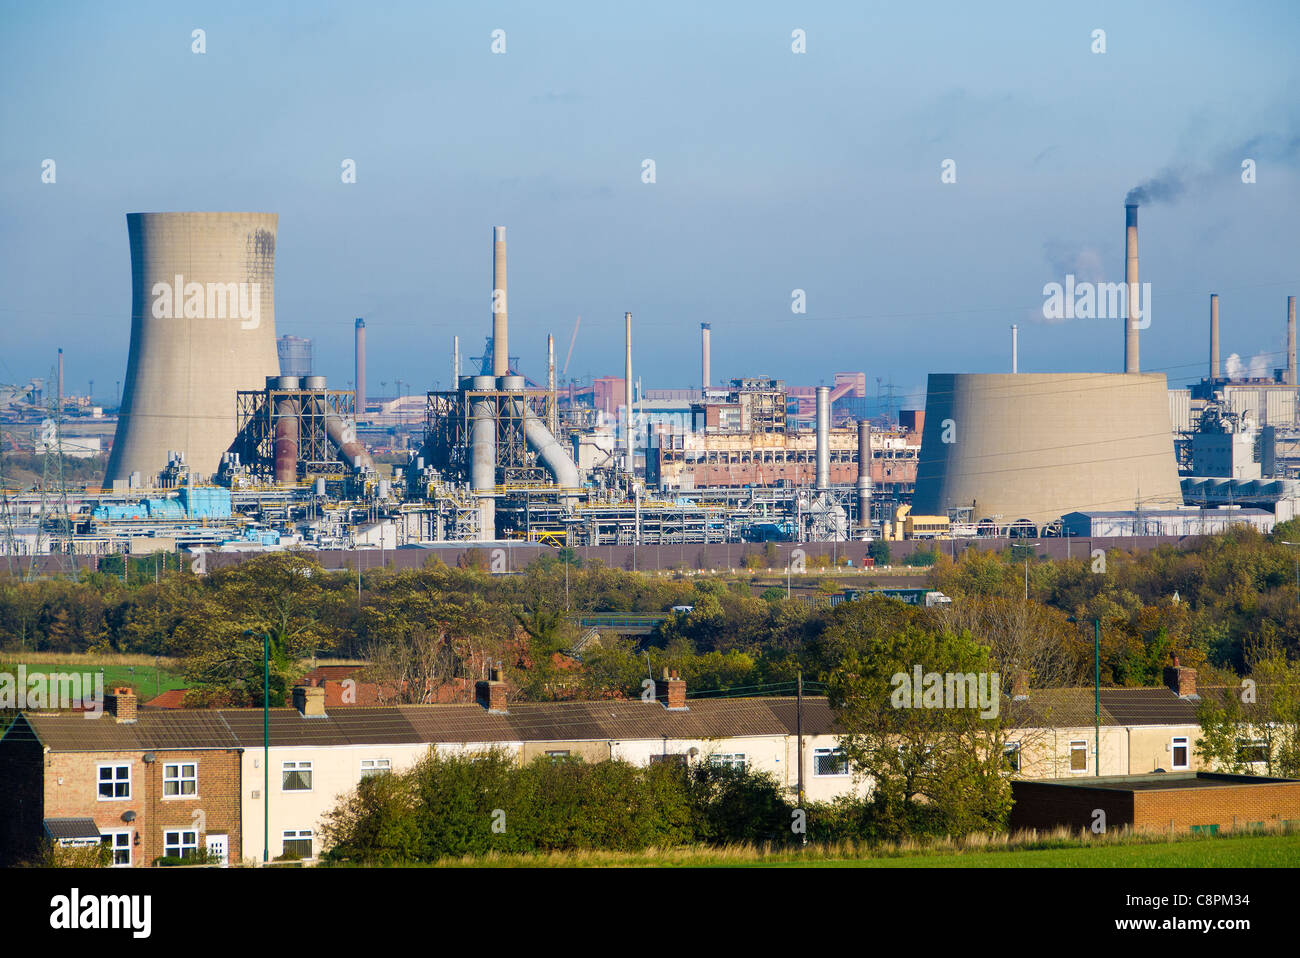 Houses at South Lackenby in front of Wilton site chemical plant and Teesside Gas turbine power station Stock Photo